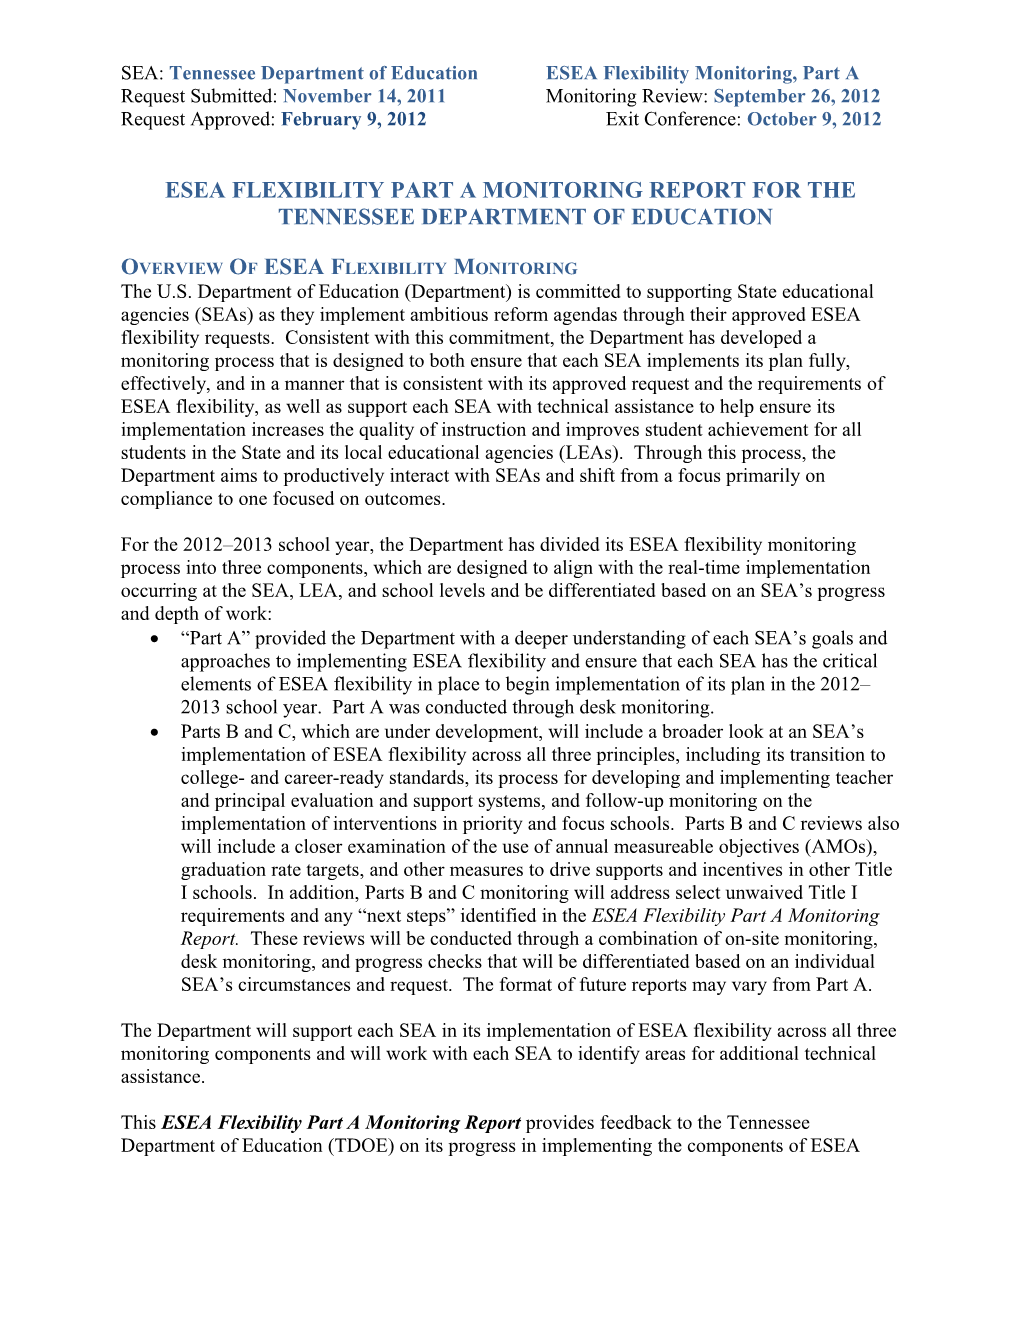 Tennessee ESEA Flexibility Part a Monitoring Report